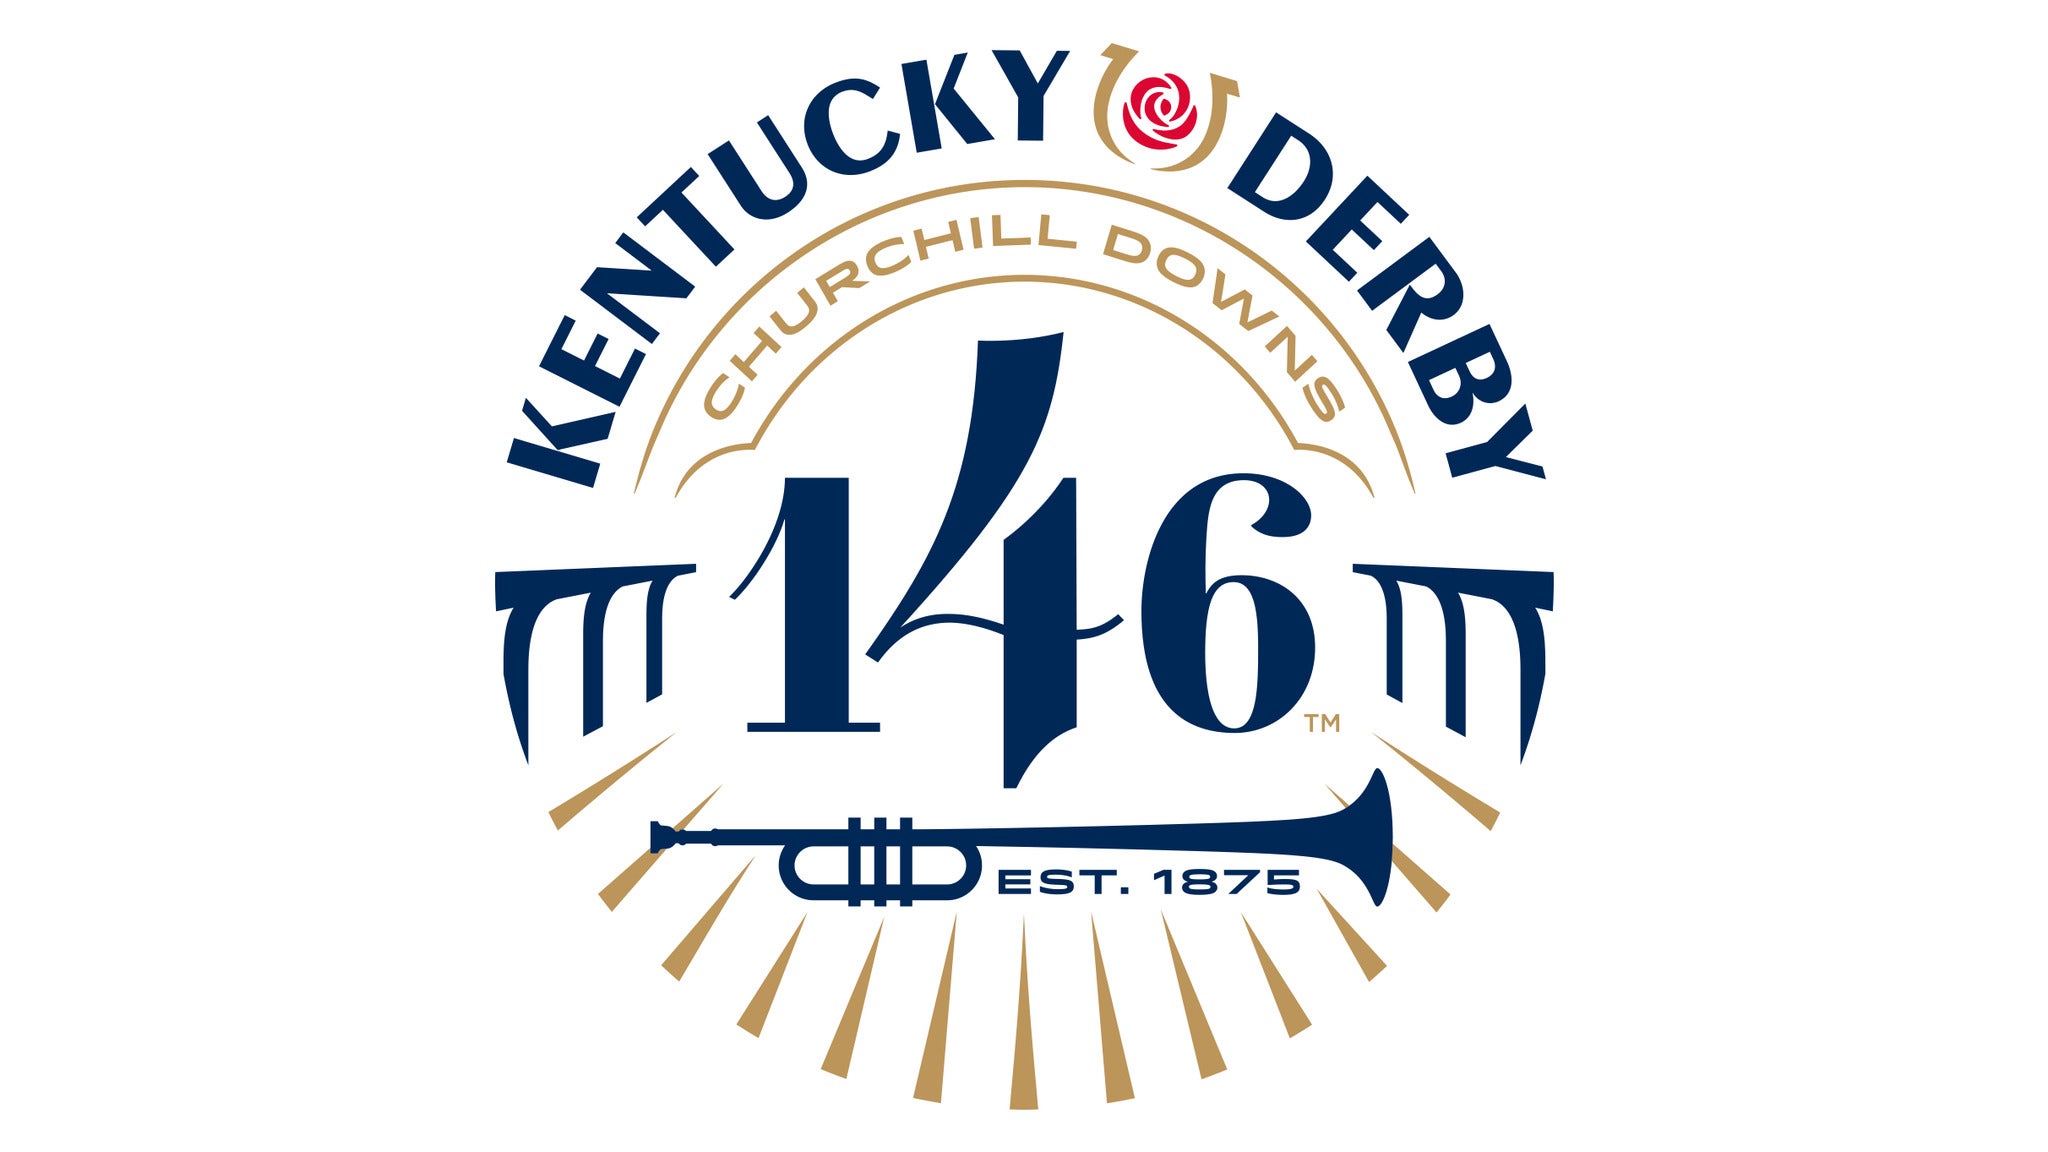 146th Kentucky Derby - Infield & Paddock General Admission Single Day in Louisville promo photo for Advance Purchase Pricing presale offer code